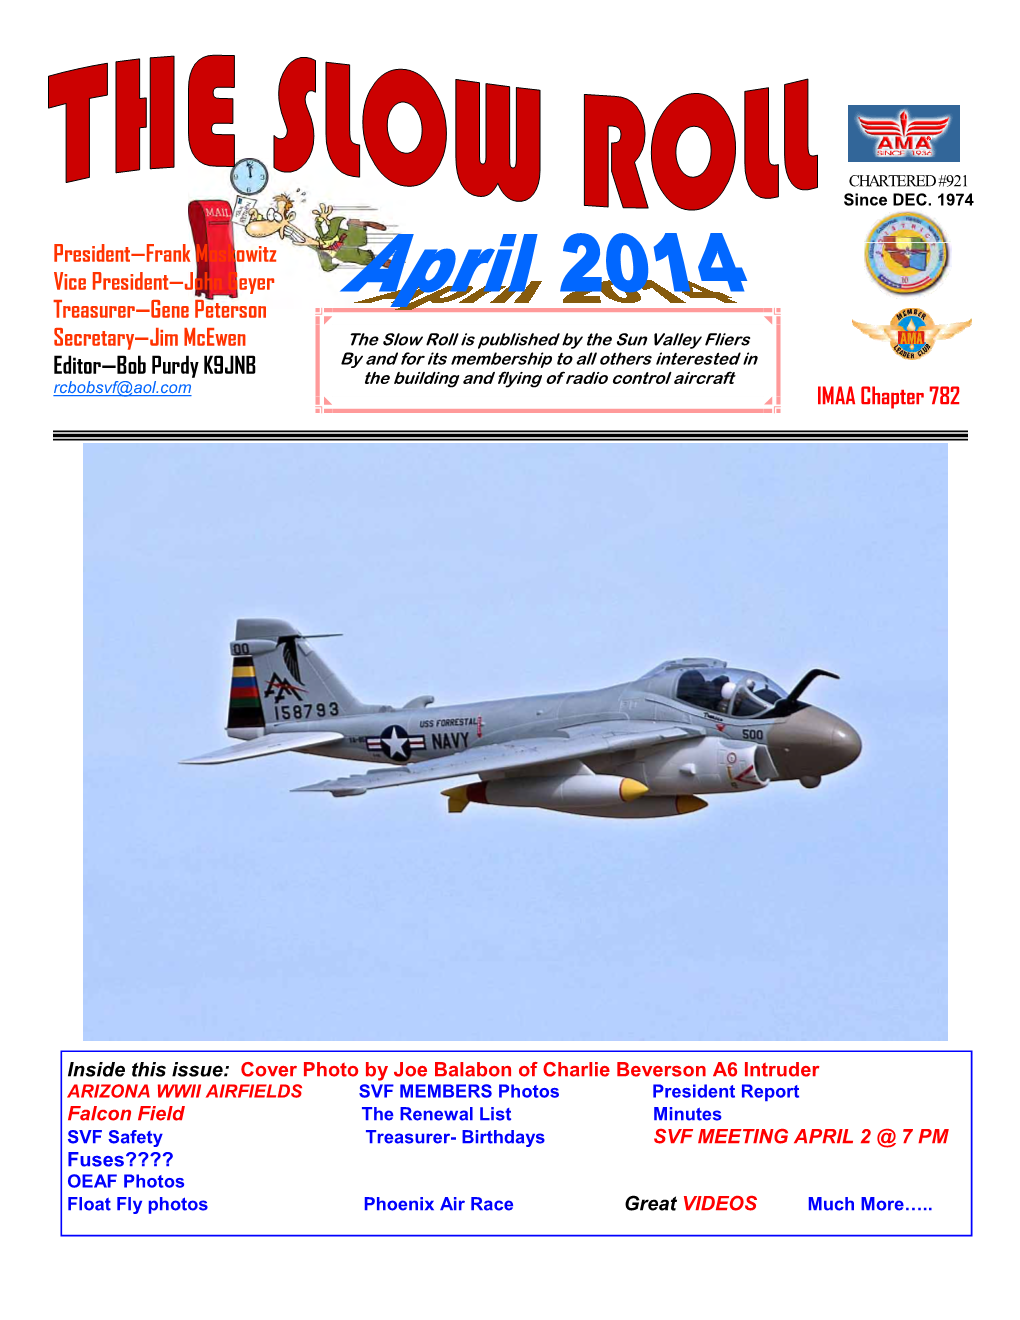 APRIL 2 @ 7 PM Fuses???? OEAF Photos Float Fly Photos Phoenix Air Race Great VIDEOS Much More…